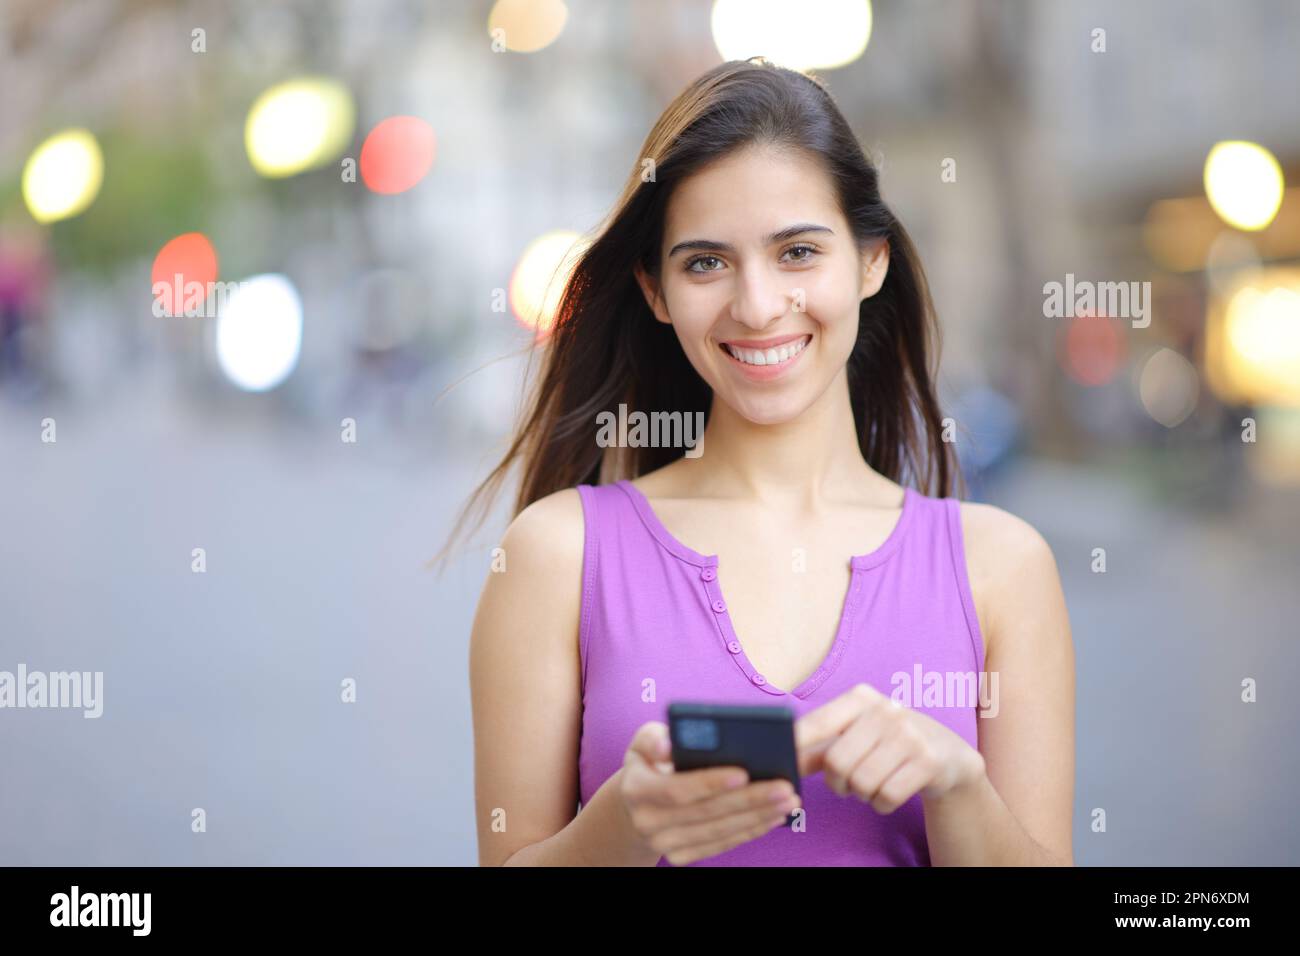 Front view portrait of a happy woman holding smart phone in the street looking at you Stock Photo